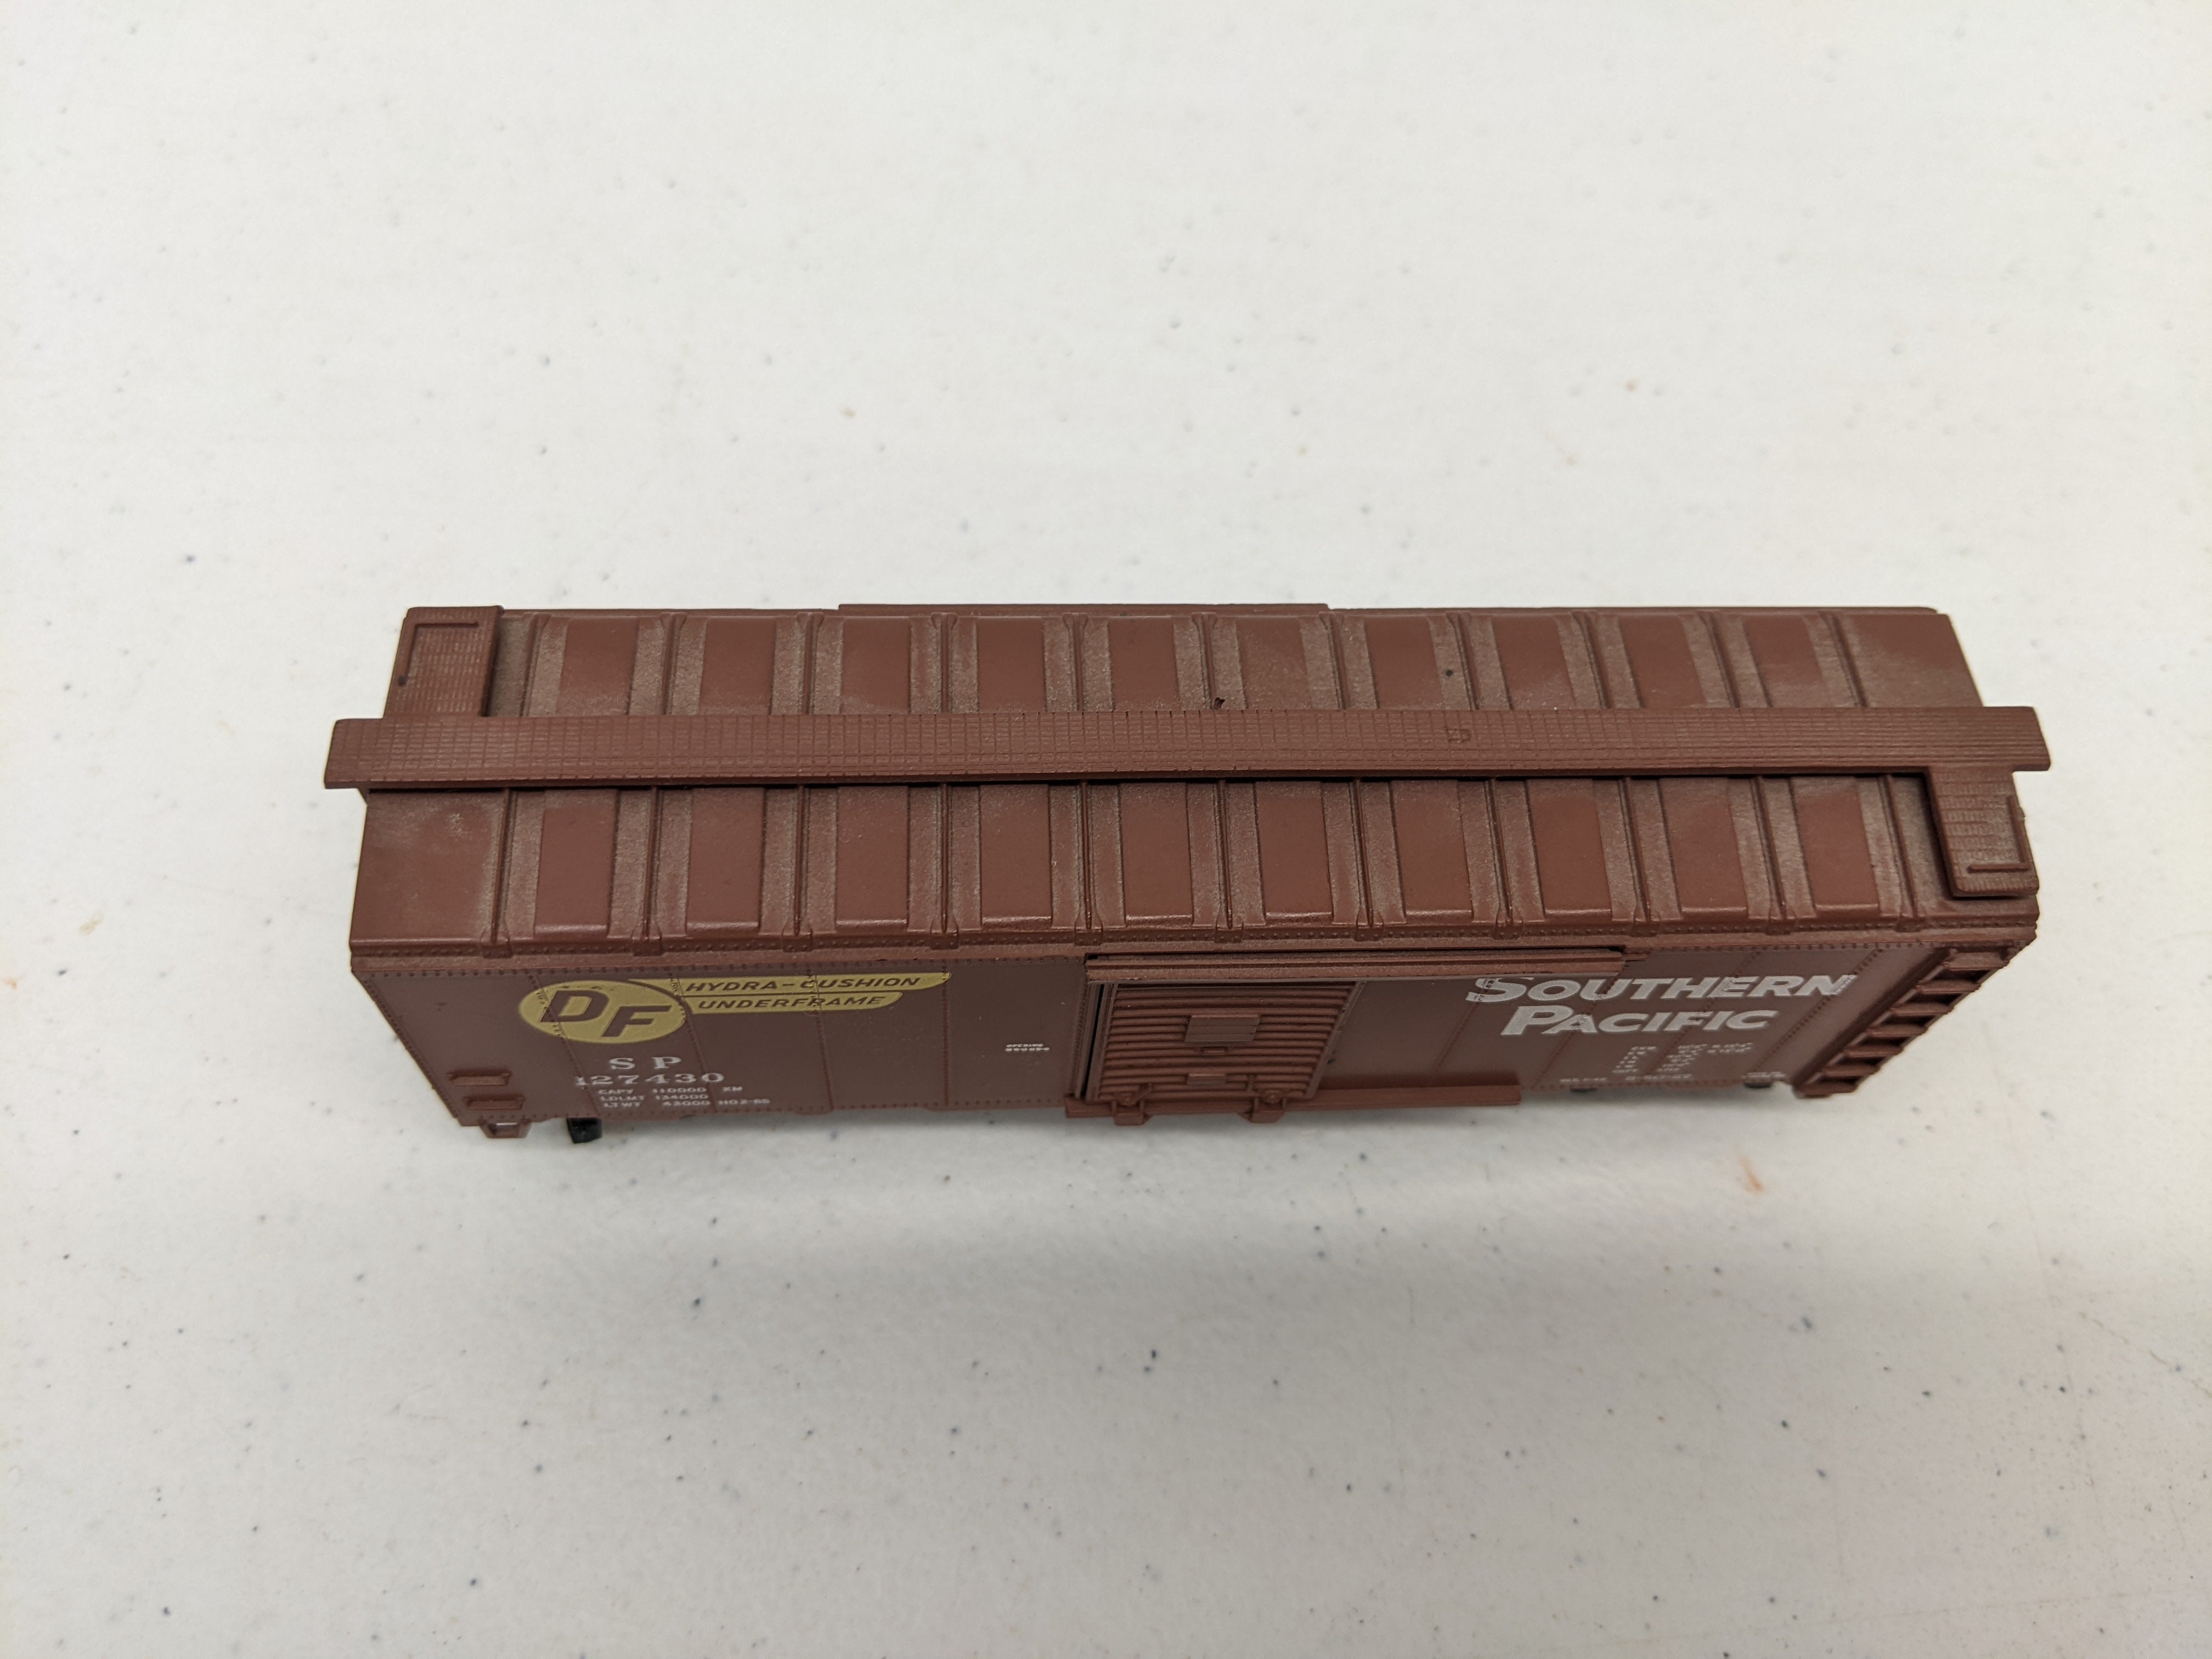 USED Athearn HO Scale, 40' Box Car, Southern Pacific SP #127430